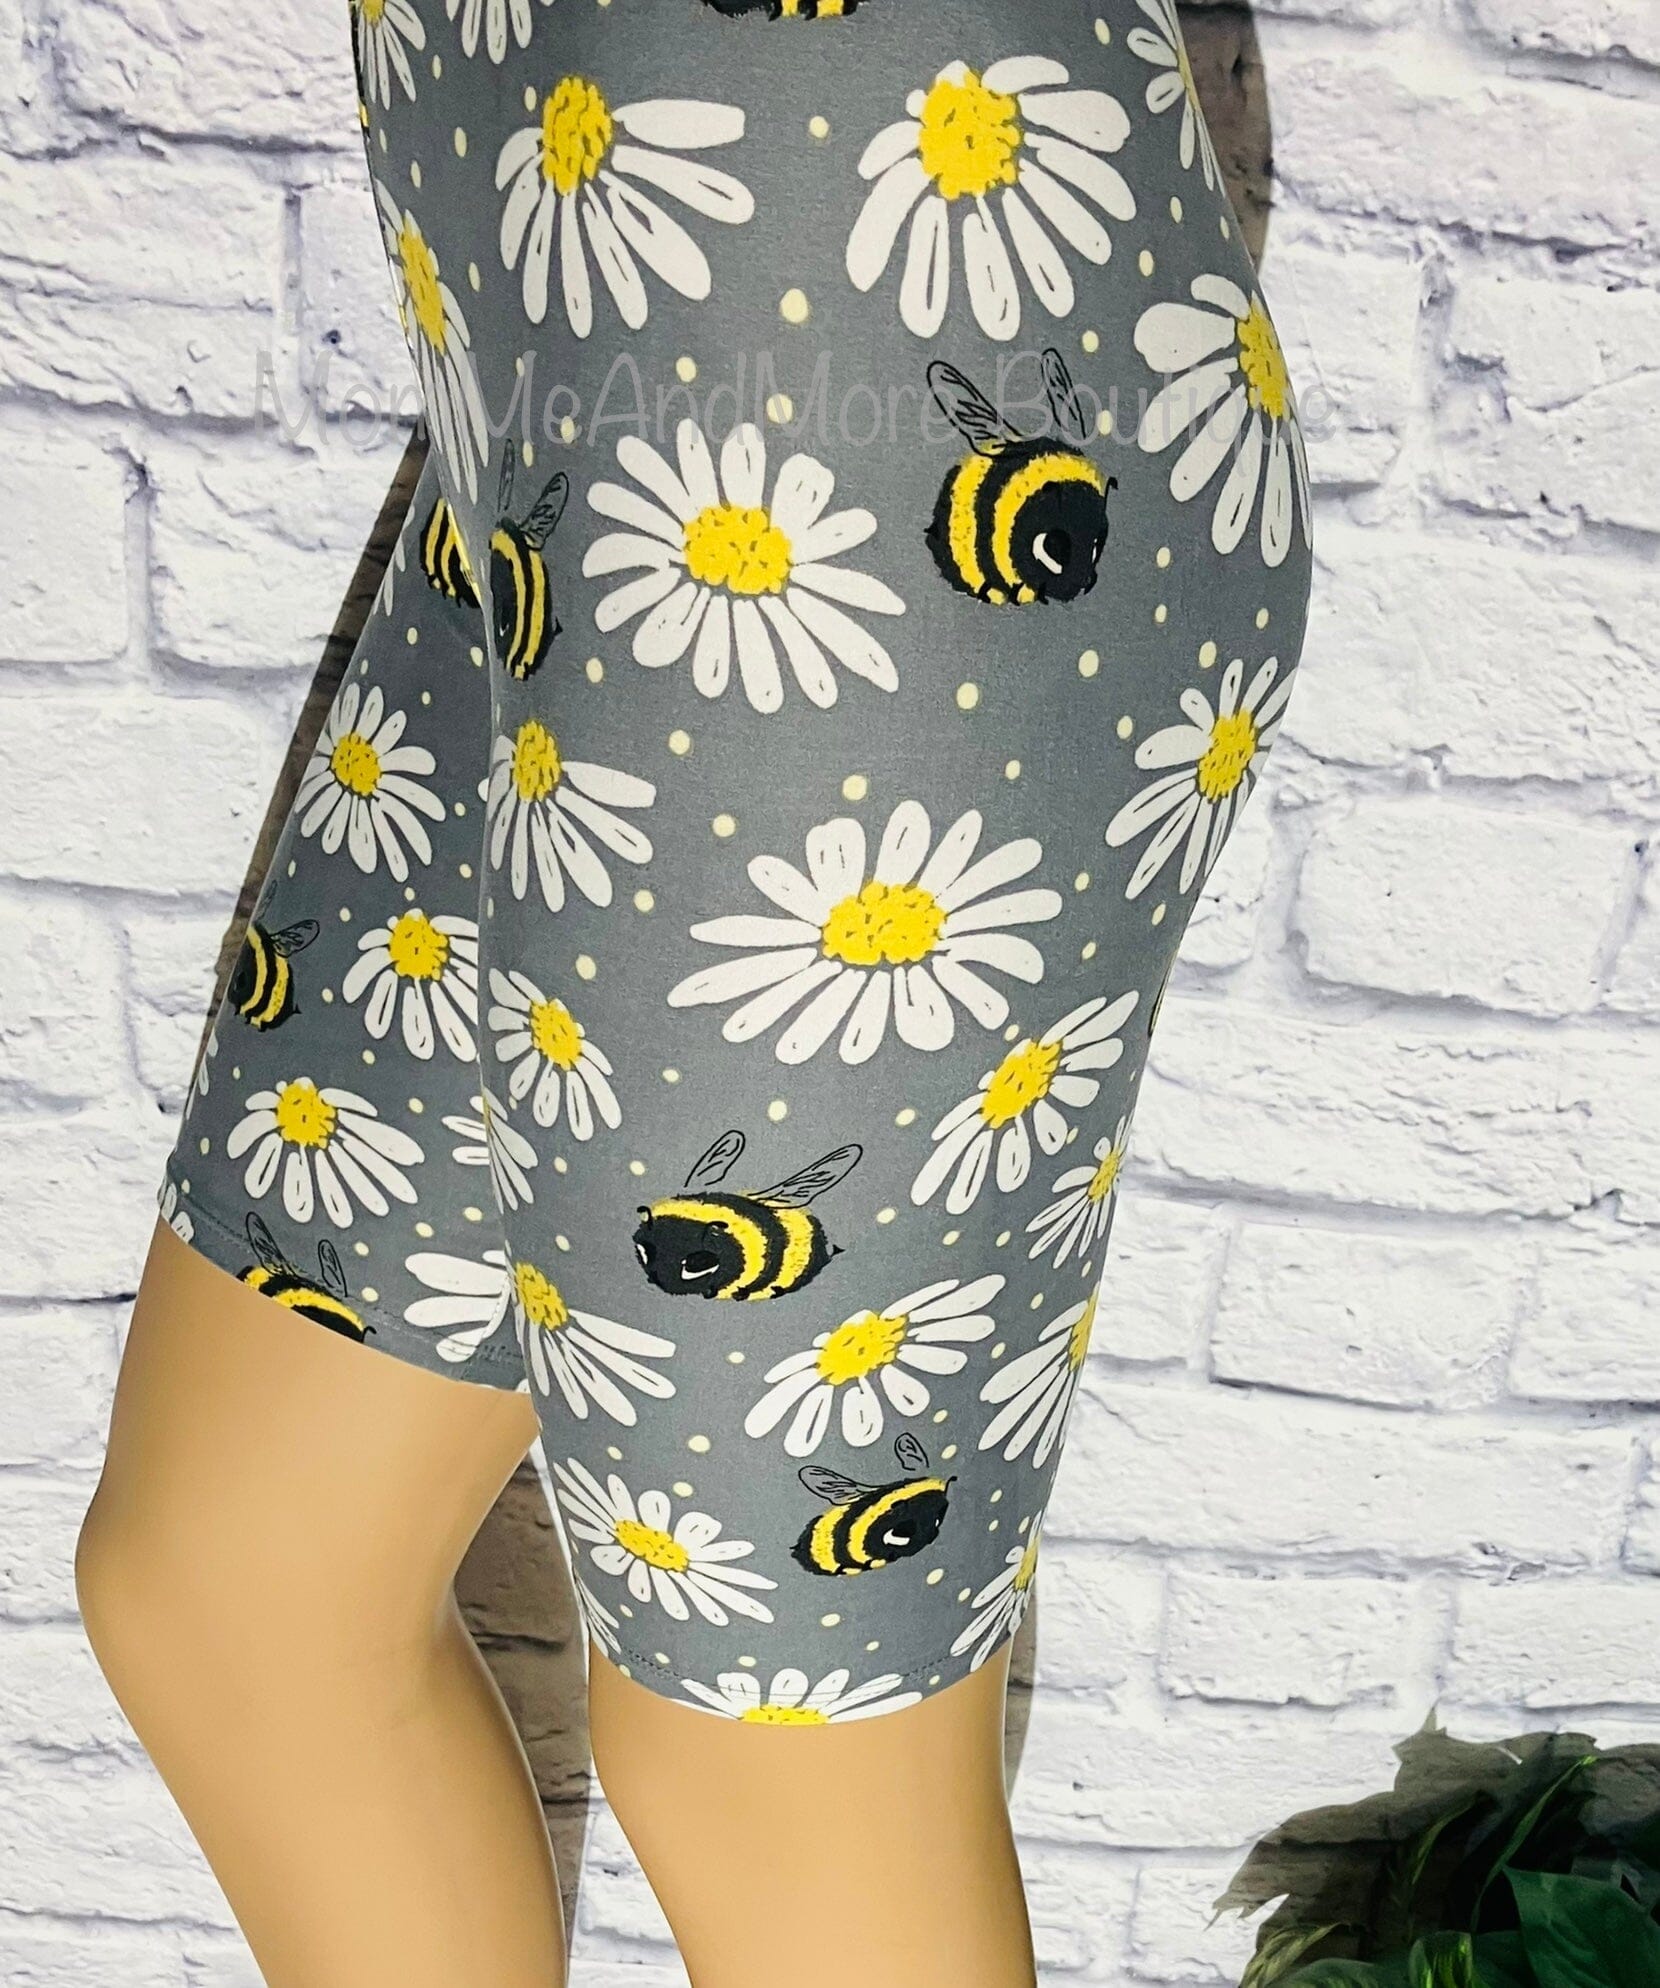 Womens Best Shorts, Daisy Bee Printed Biker Bermuda Long Shorts Shorts MomMe and More 